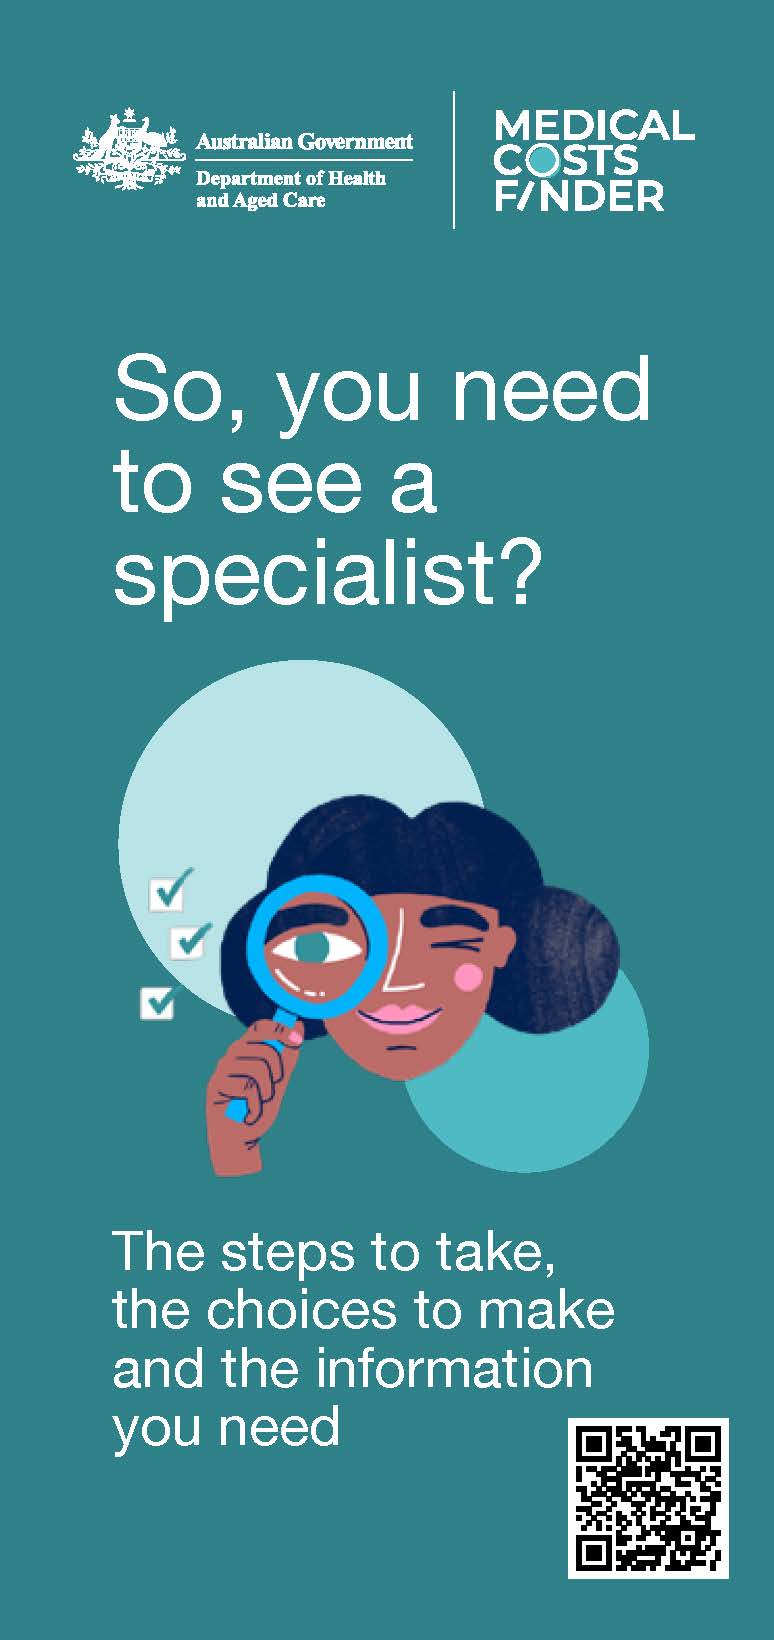 So you need to see a specialist?